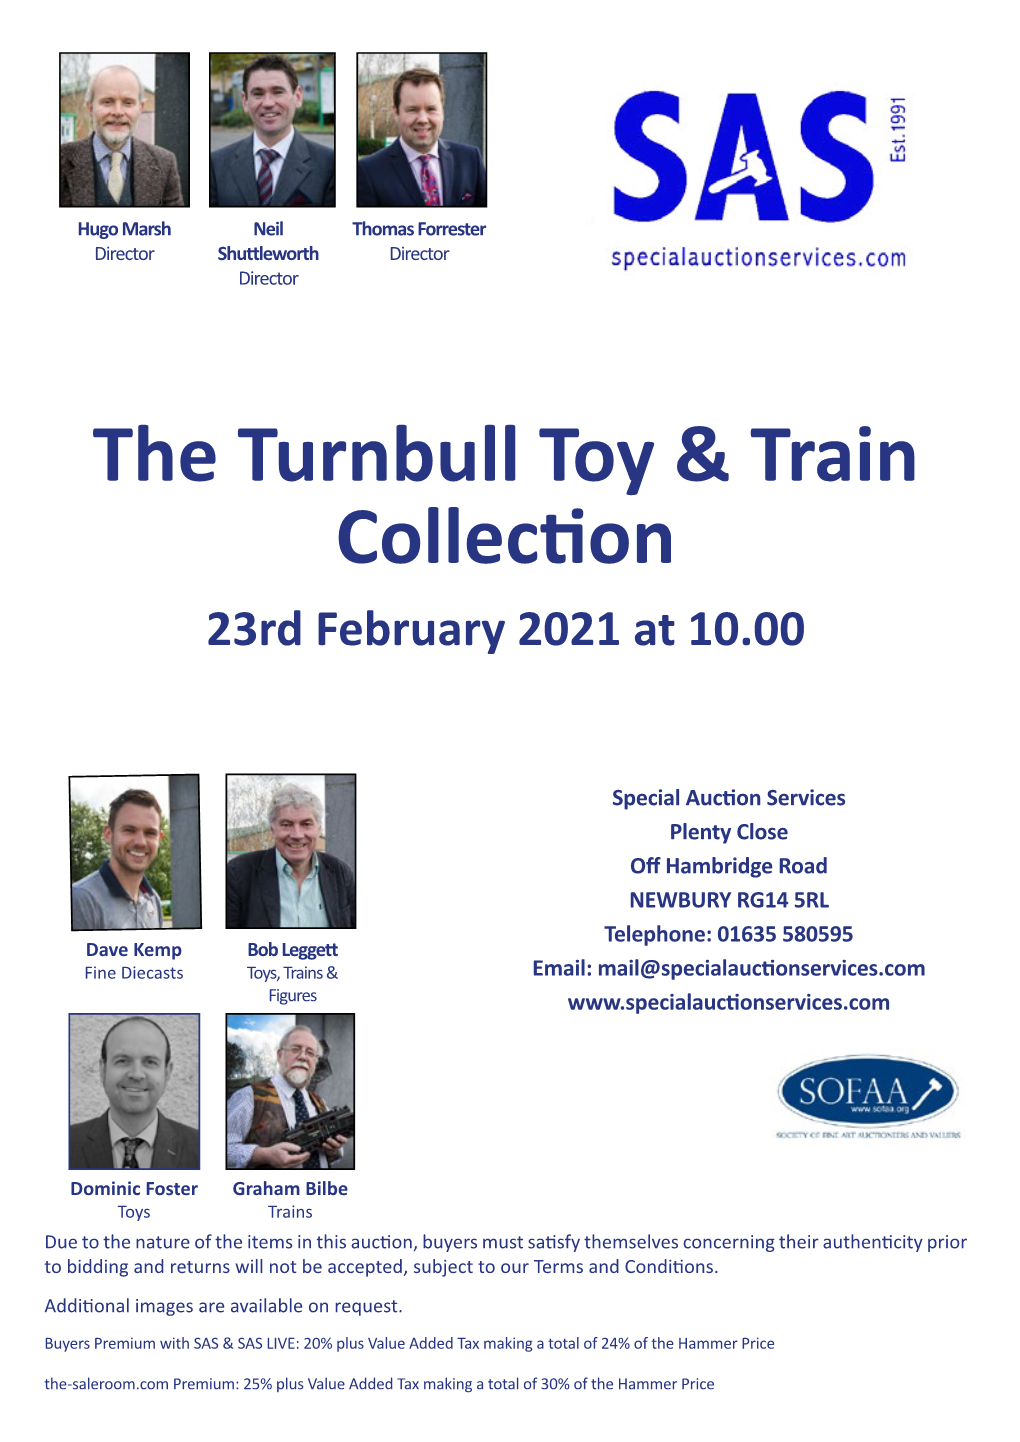 The Turnbull Toy & Train Collection